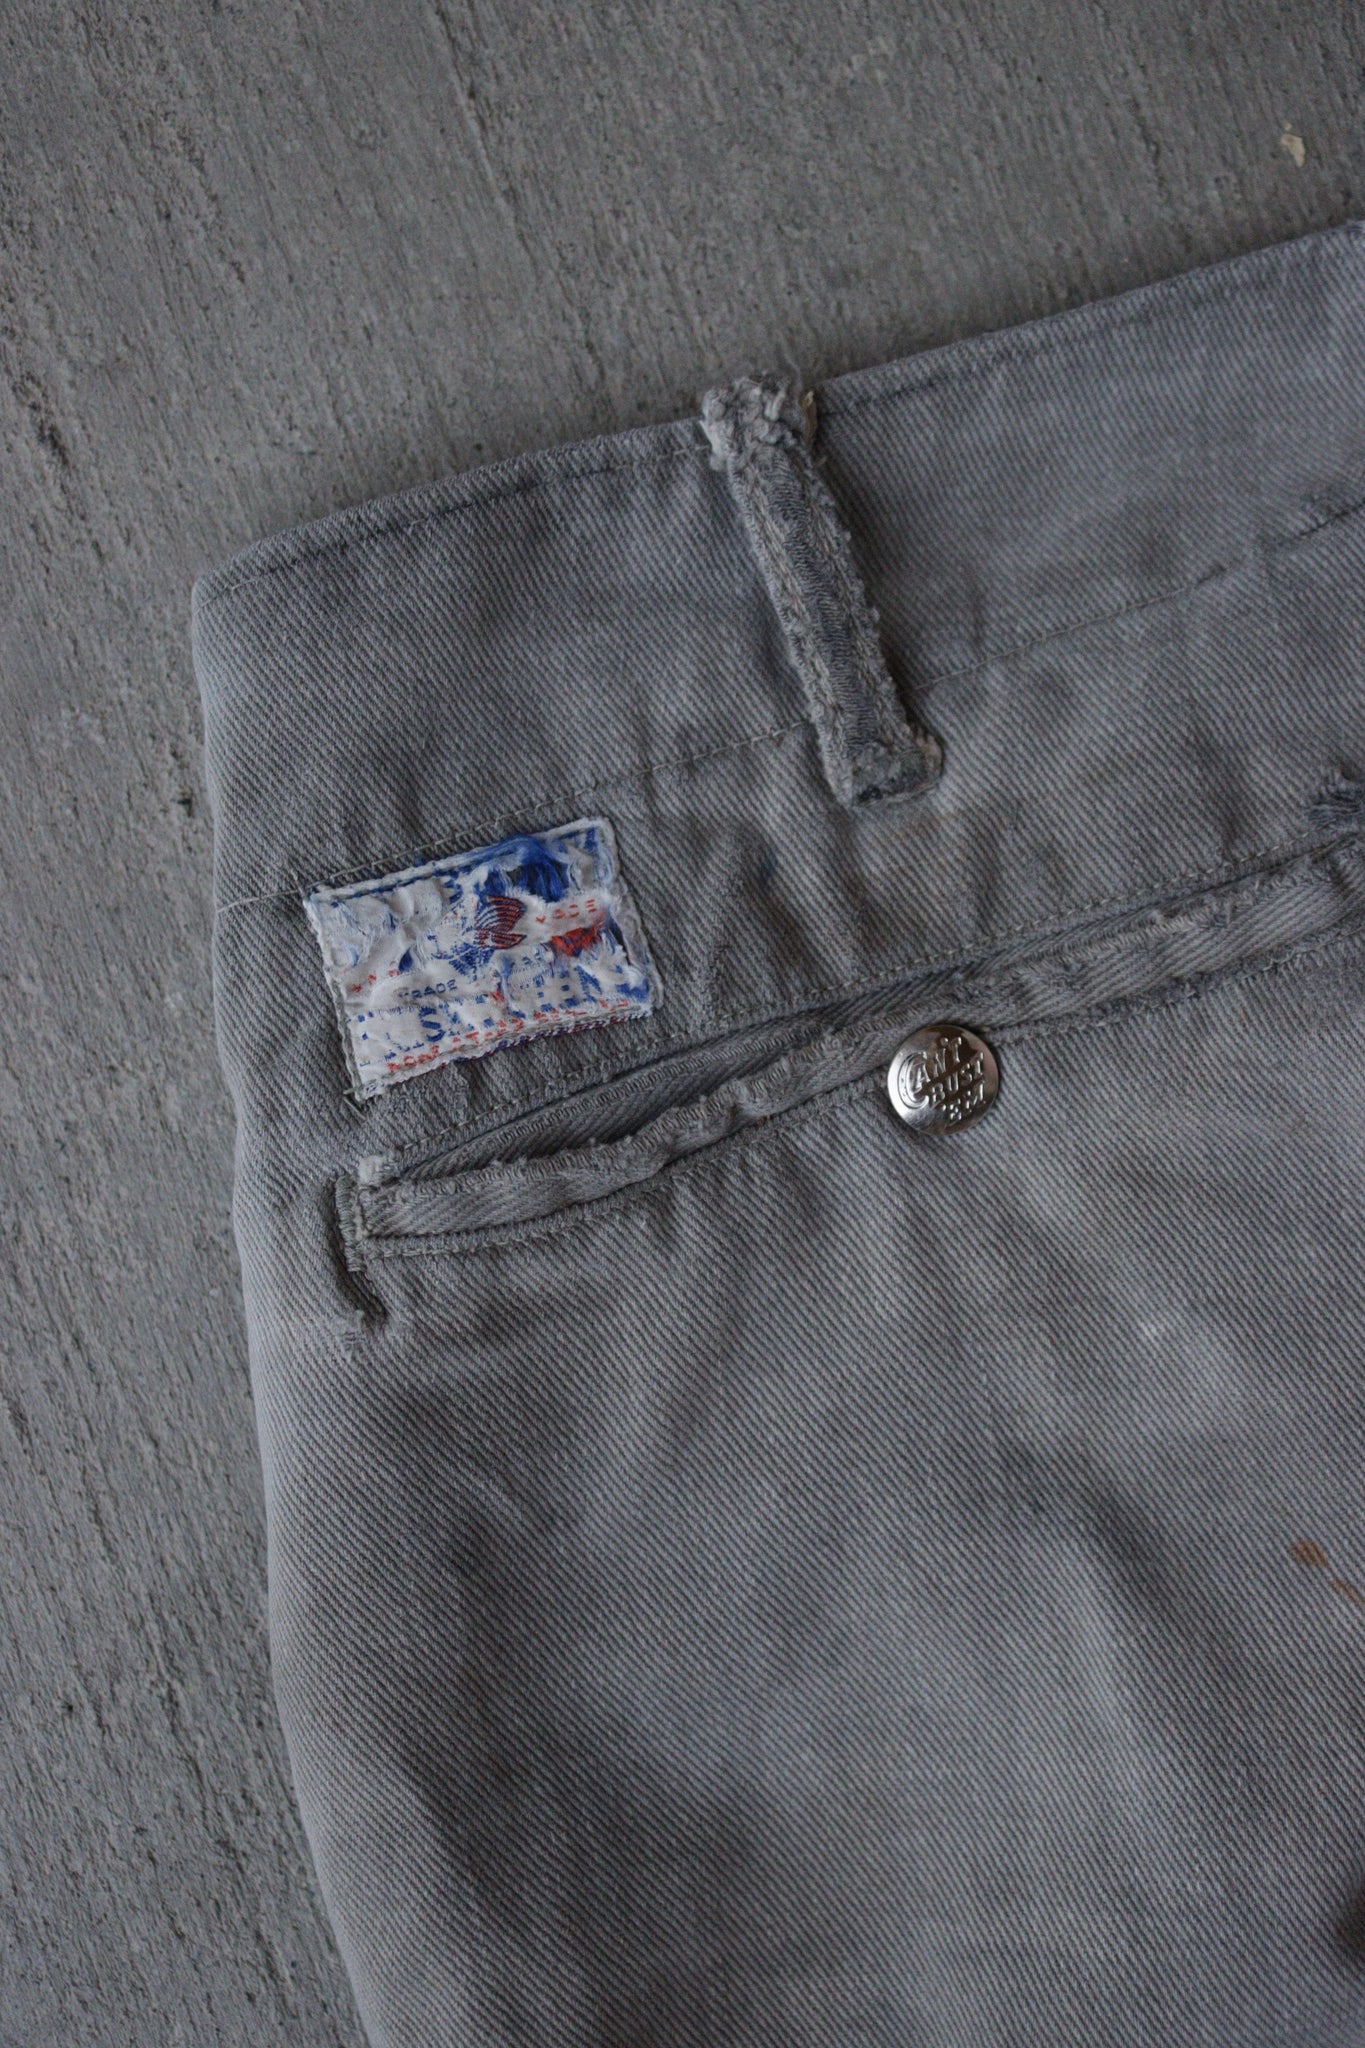 1940s Lee Can't Bust 'Em 'Friko Jeens' Faded & Repaired Work Pants - 32